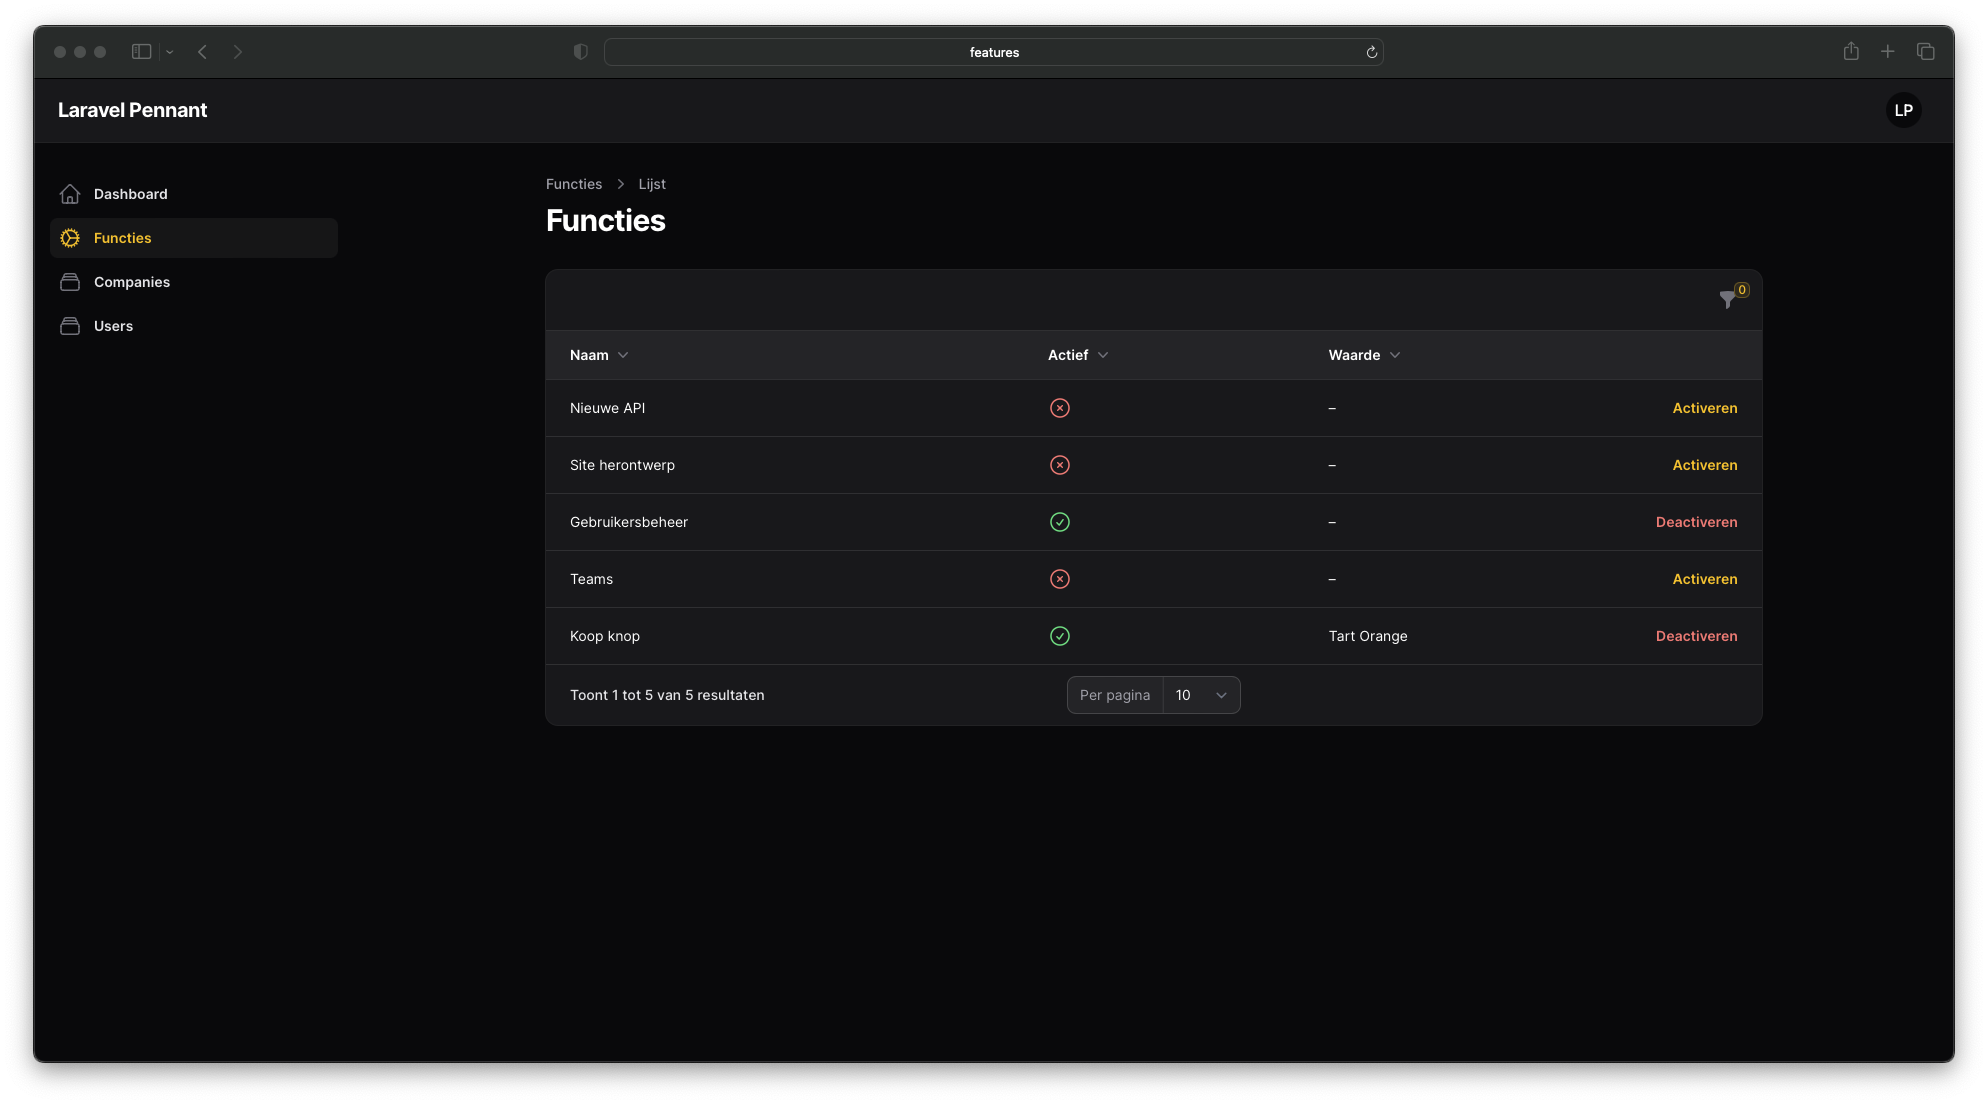 Overview of feature flags in dark mode